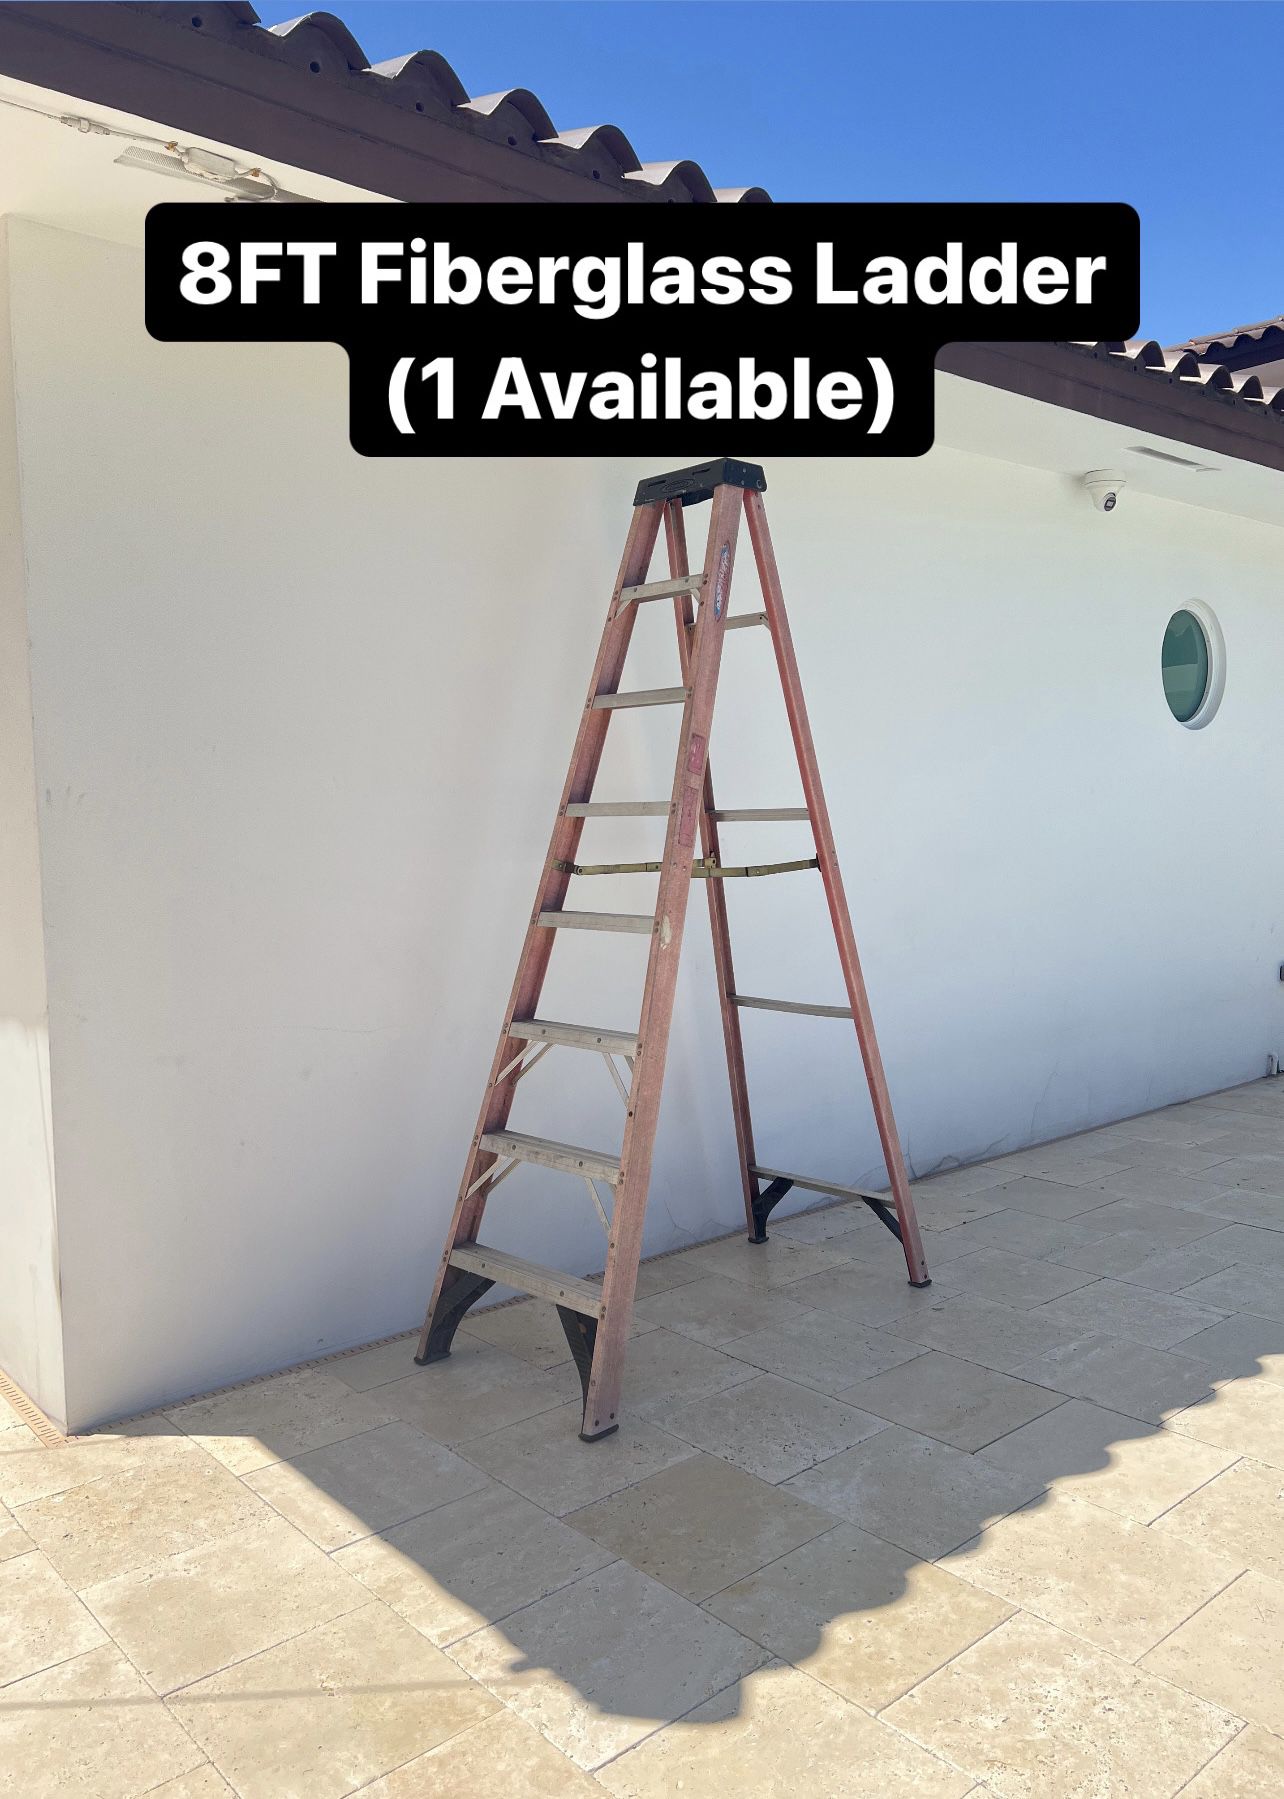 8ft Fiberglass Ladder (1 Available) PickUp Available Today (NEED GONE ASAP)